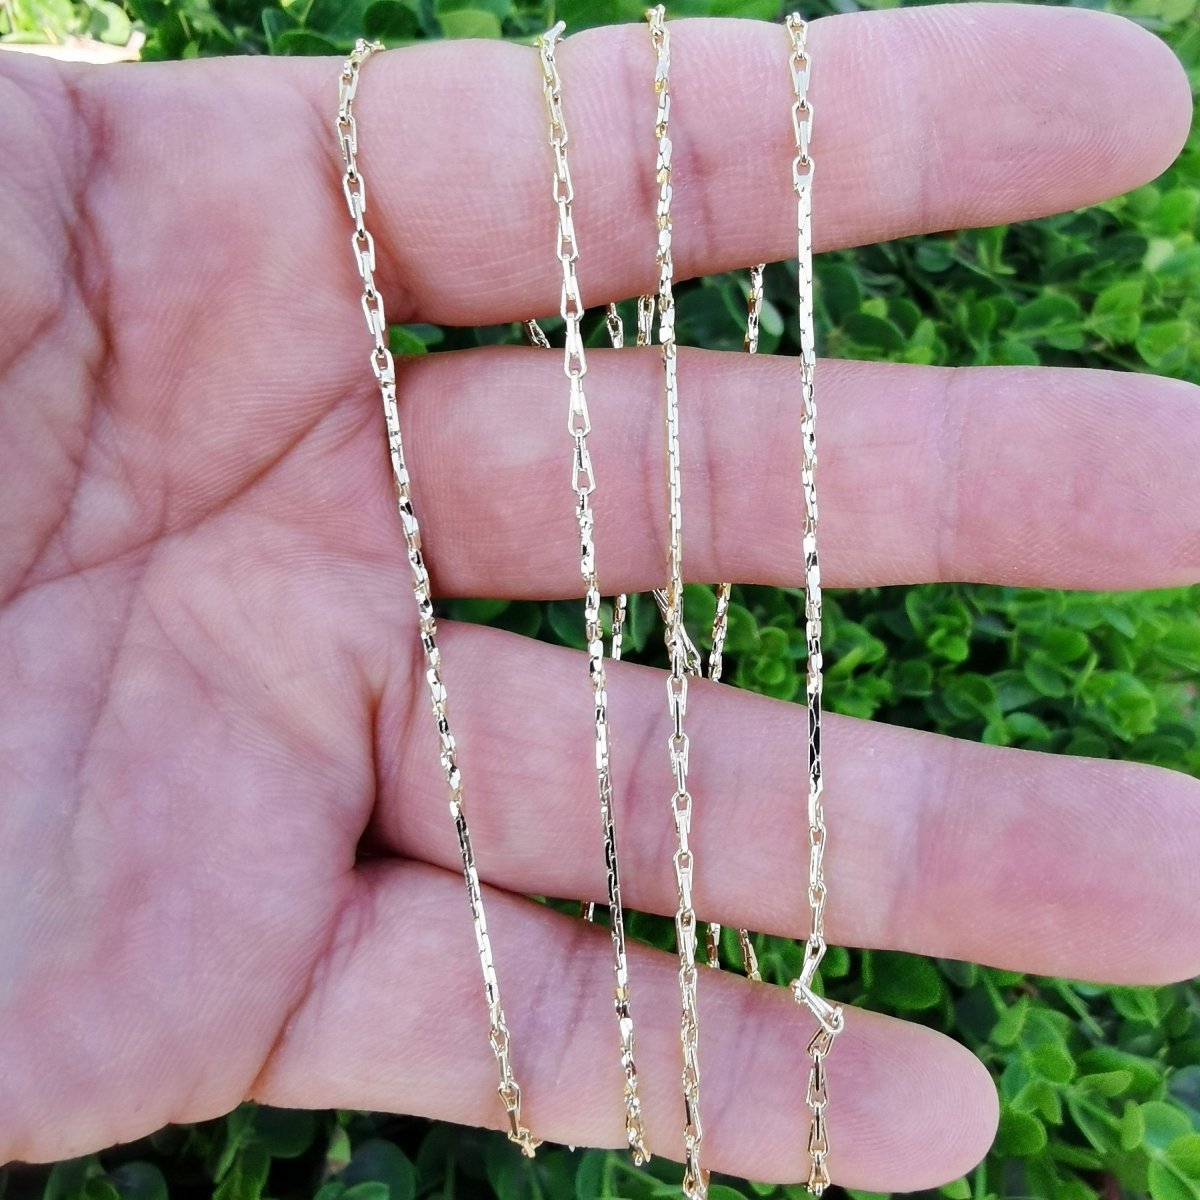 16.5 Inches Link Barleycorn Chain - 14K Gold Plated Necklace - 1.7mm Women's Necklace - Gold Plated Jewelry Ready to Wear Chain Finished Chain | CN-879 Clearance Pricing - DLUXCA